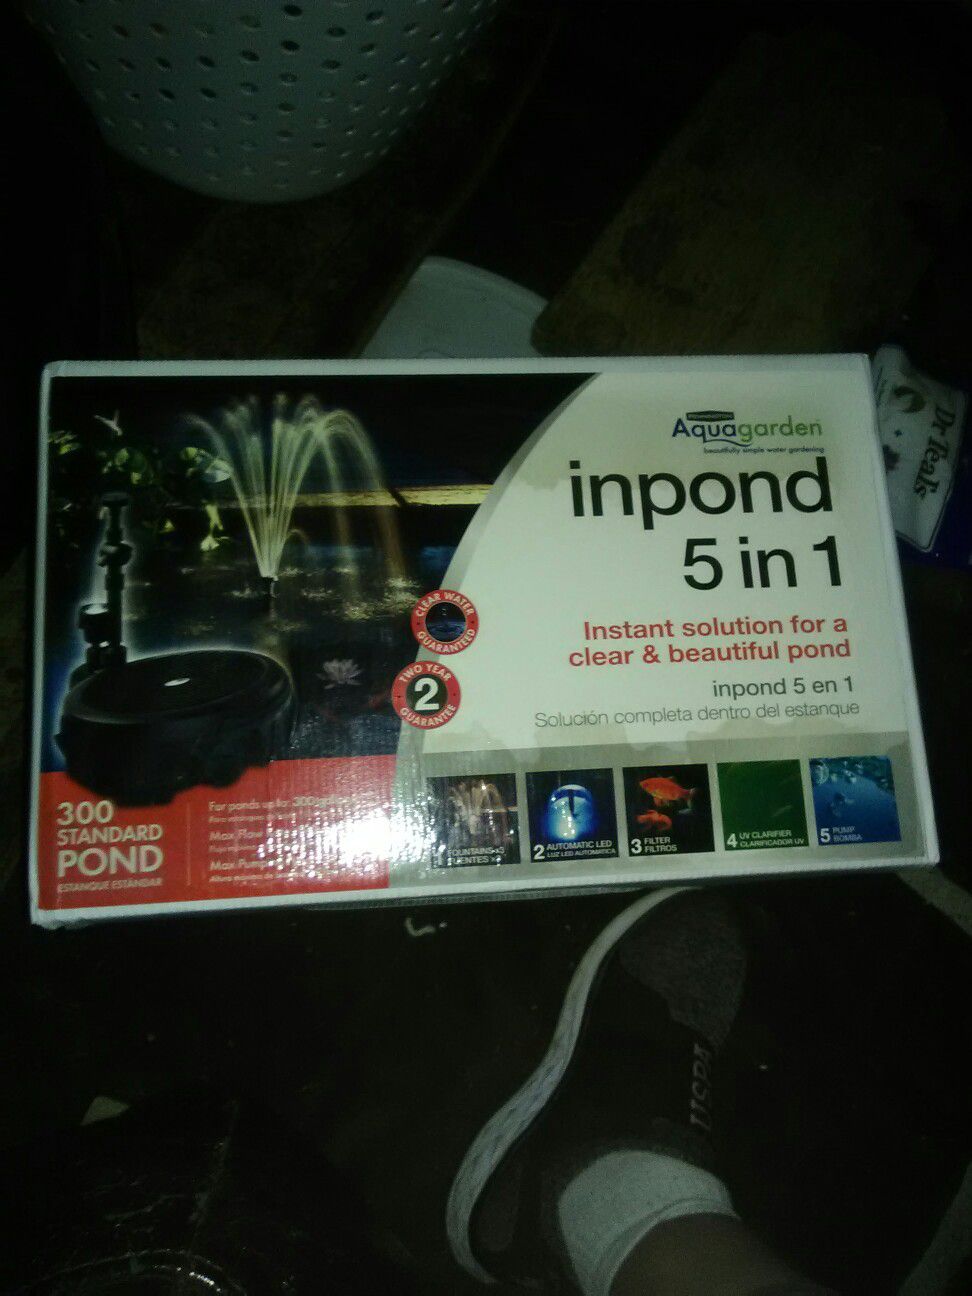 INPOND 5 IN 1 FILTER, PUMP, FOUNTAIN, LED, UV CLARIFIER. Aquagarden. NEW IN BOX!